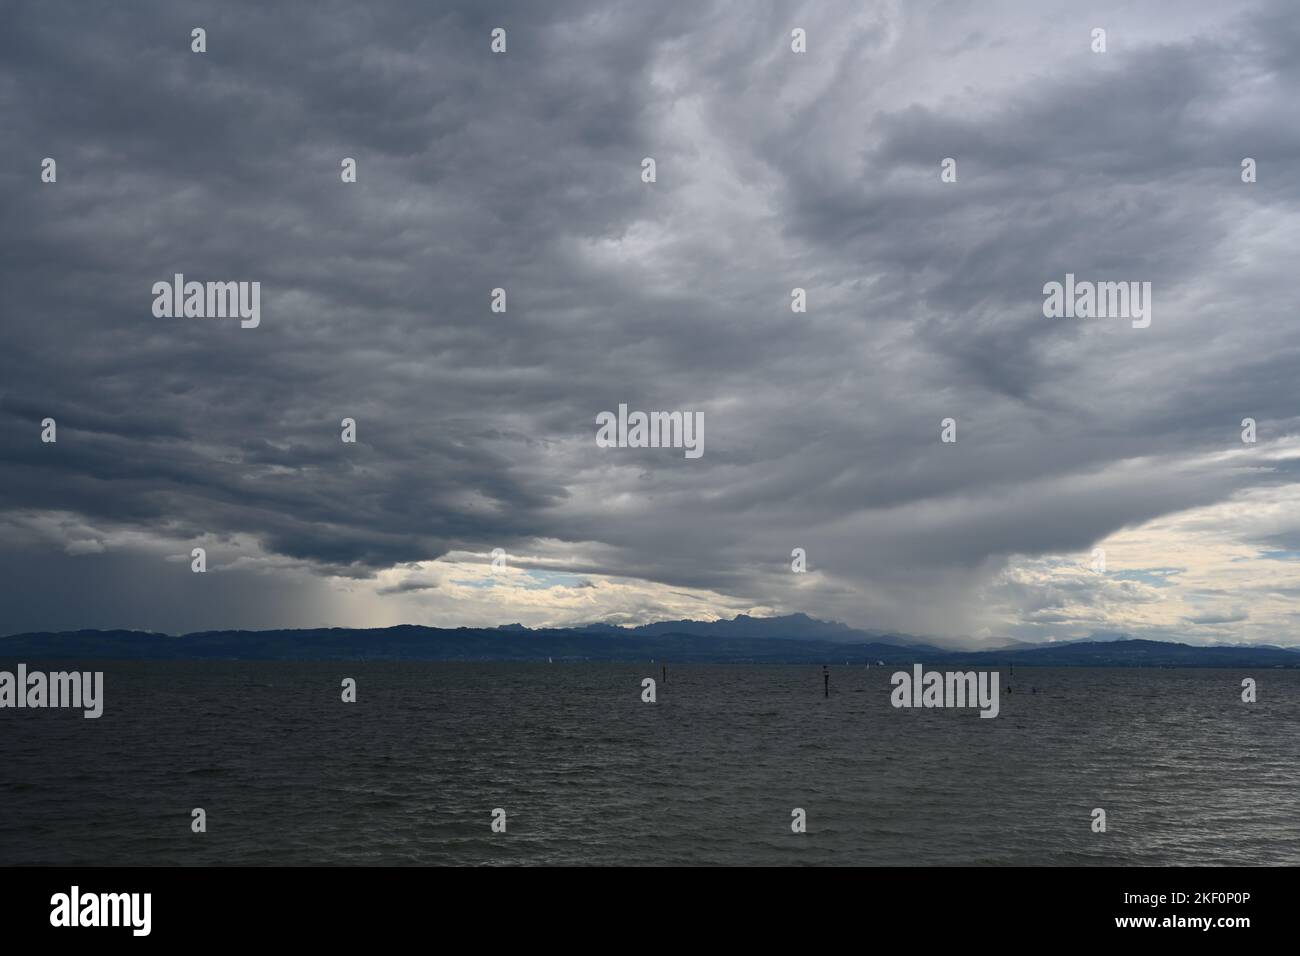 Heavy dark blue and gray rain clouds over Lake Constance observed from German town Friedrichshafen. Stock Photo